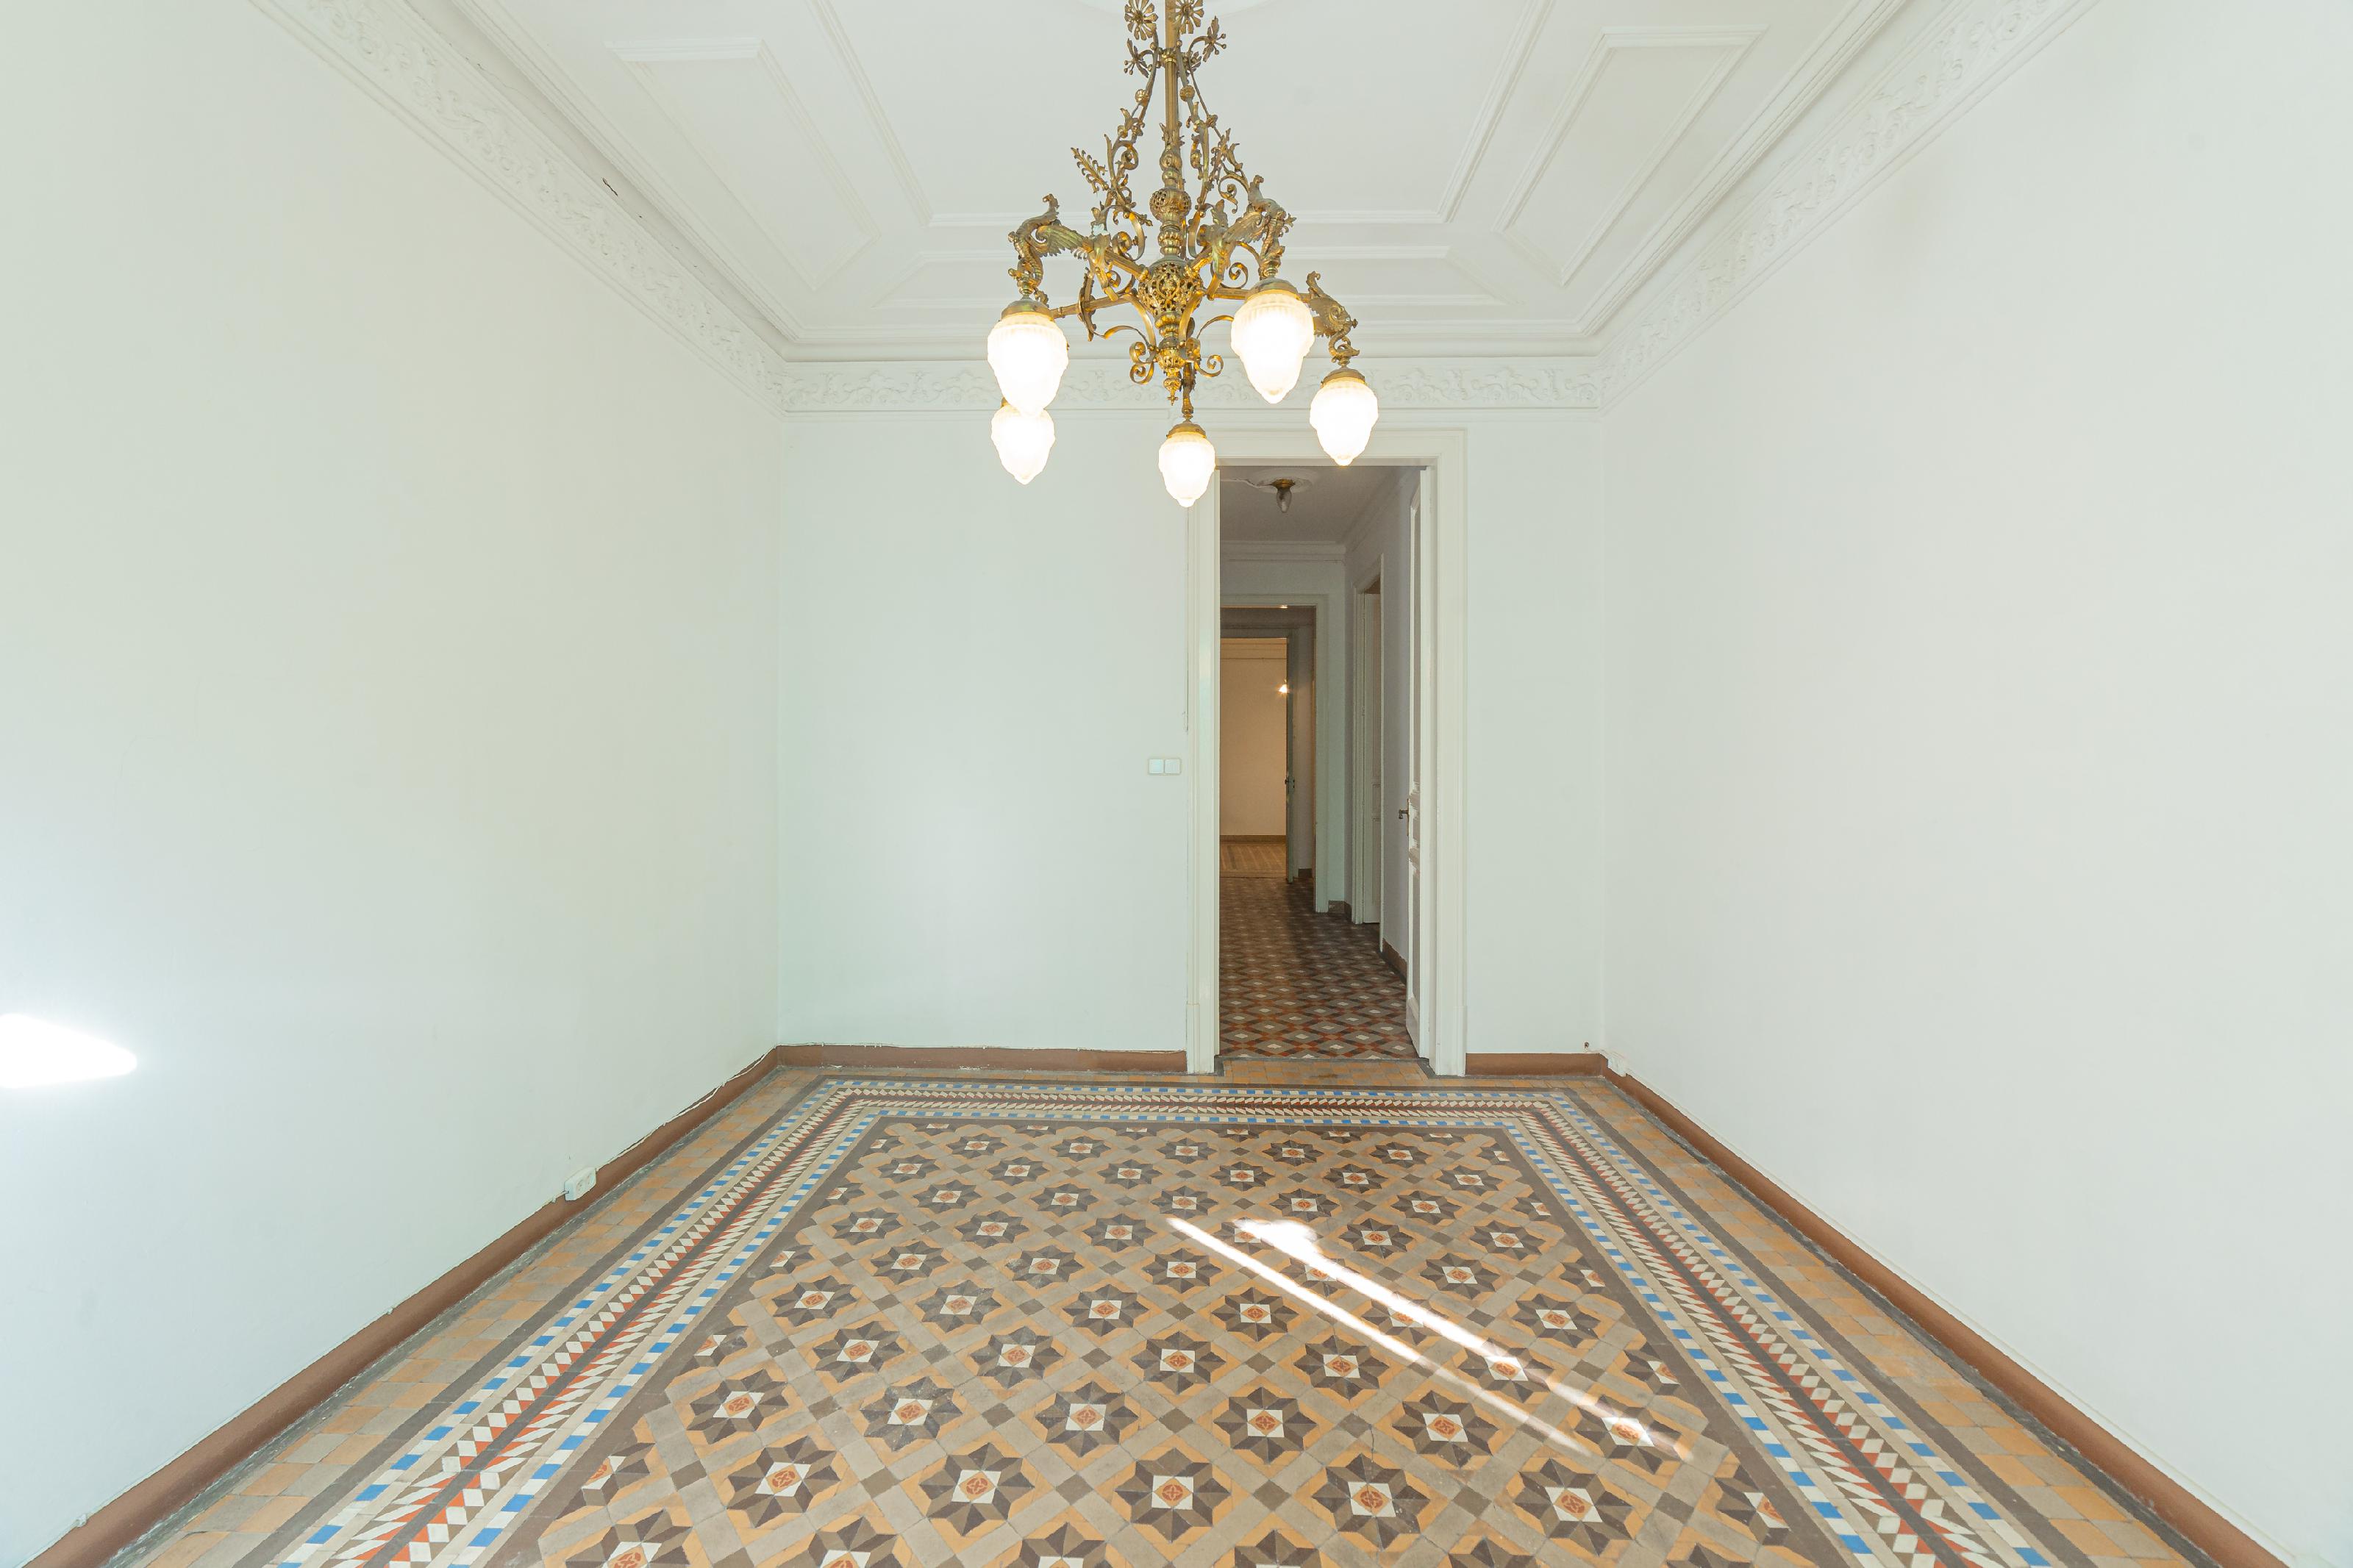 273416 Flat for sale in Eixample, Old Esquerre Eixample 21